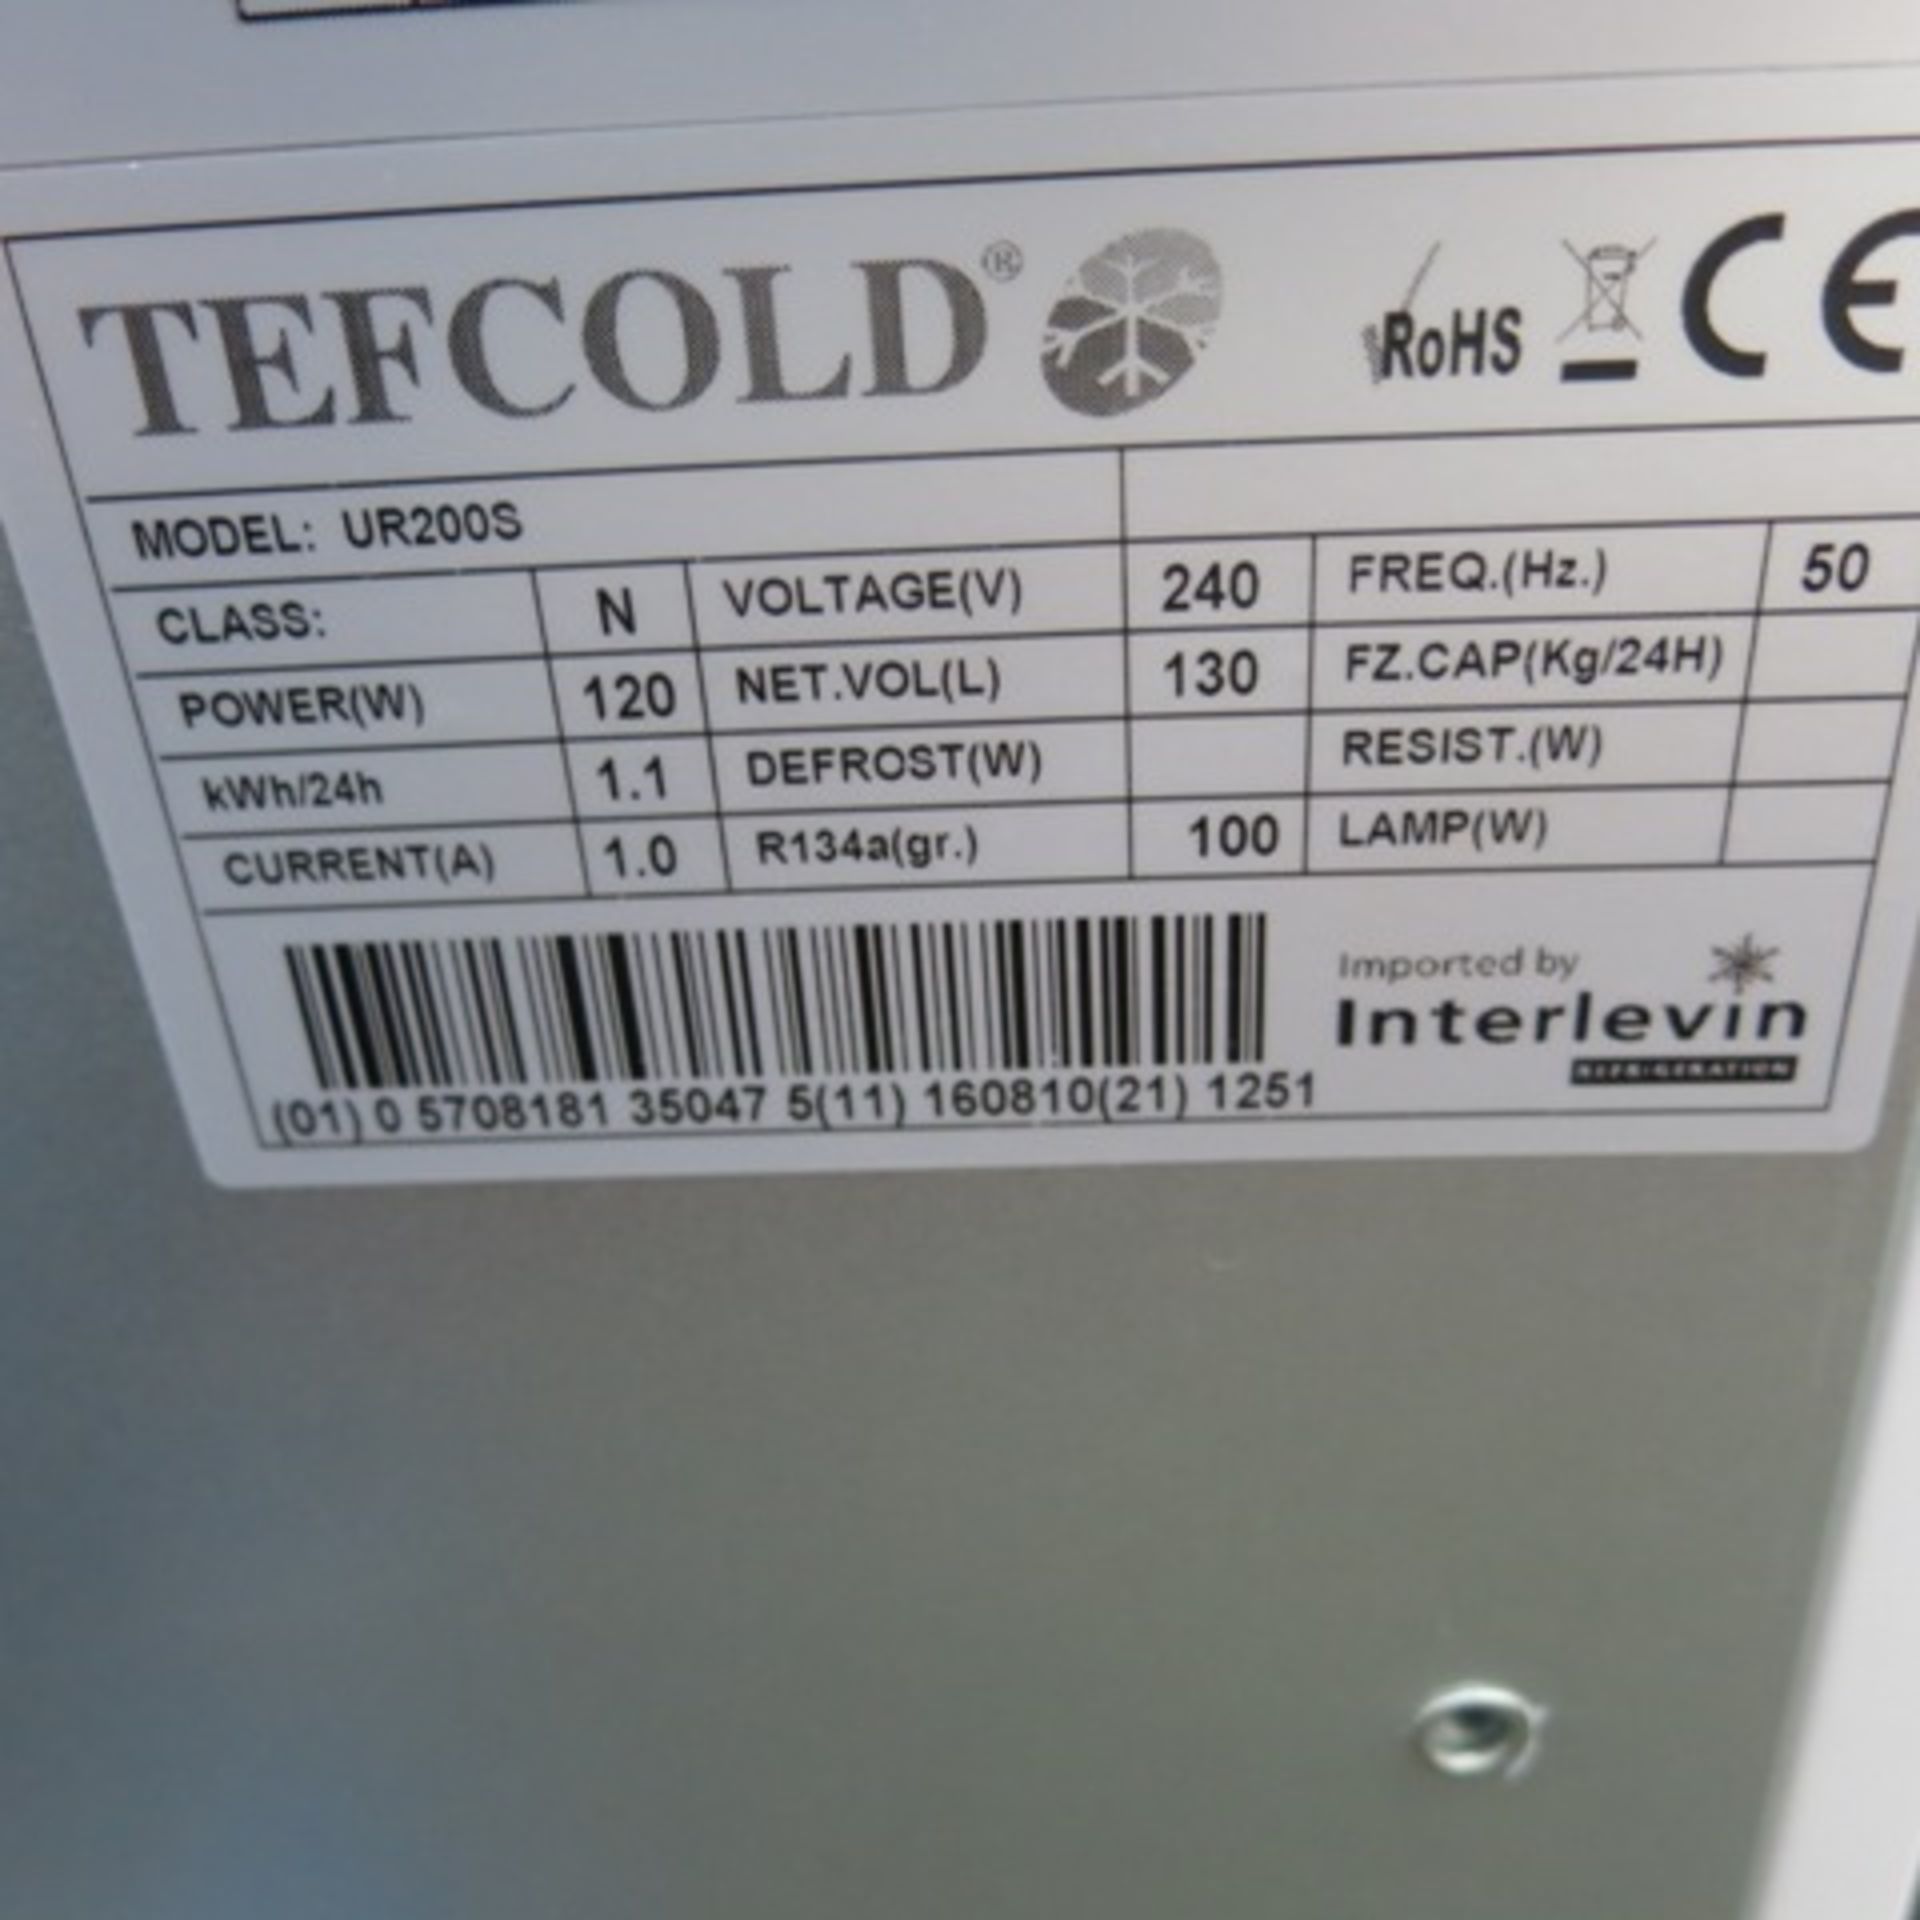 Tefcold Under Counter Chiller, Model UR200S, Year 2016, Size (H)80 x (D)58 x (W)60cm. Comes with Key - Image 3 of 6